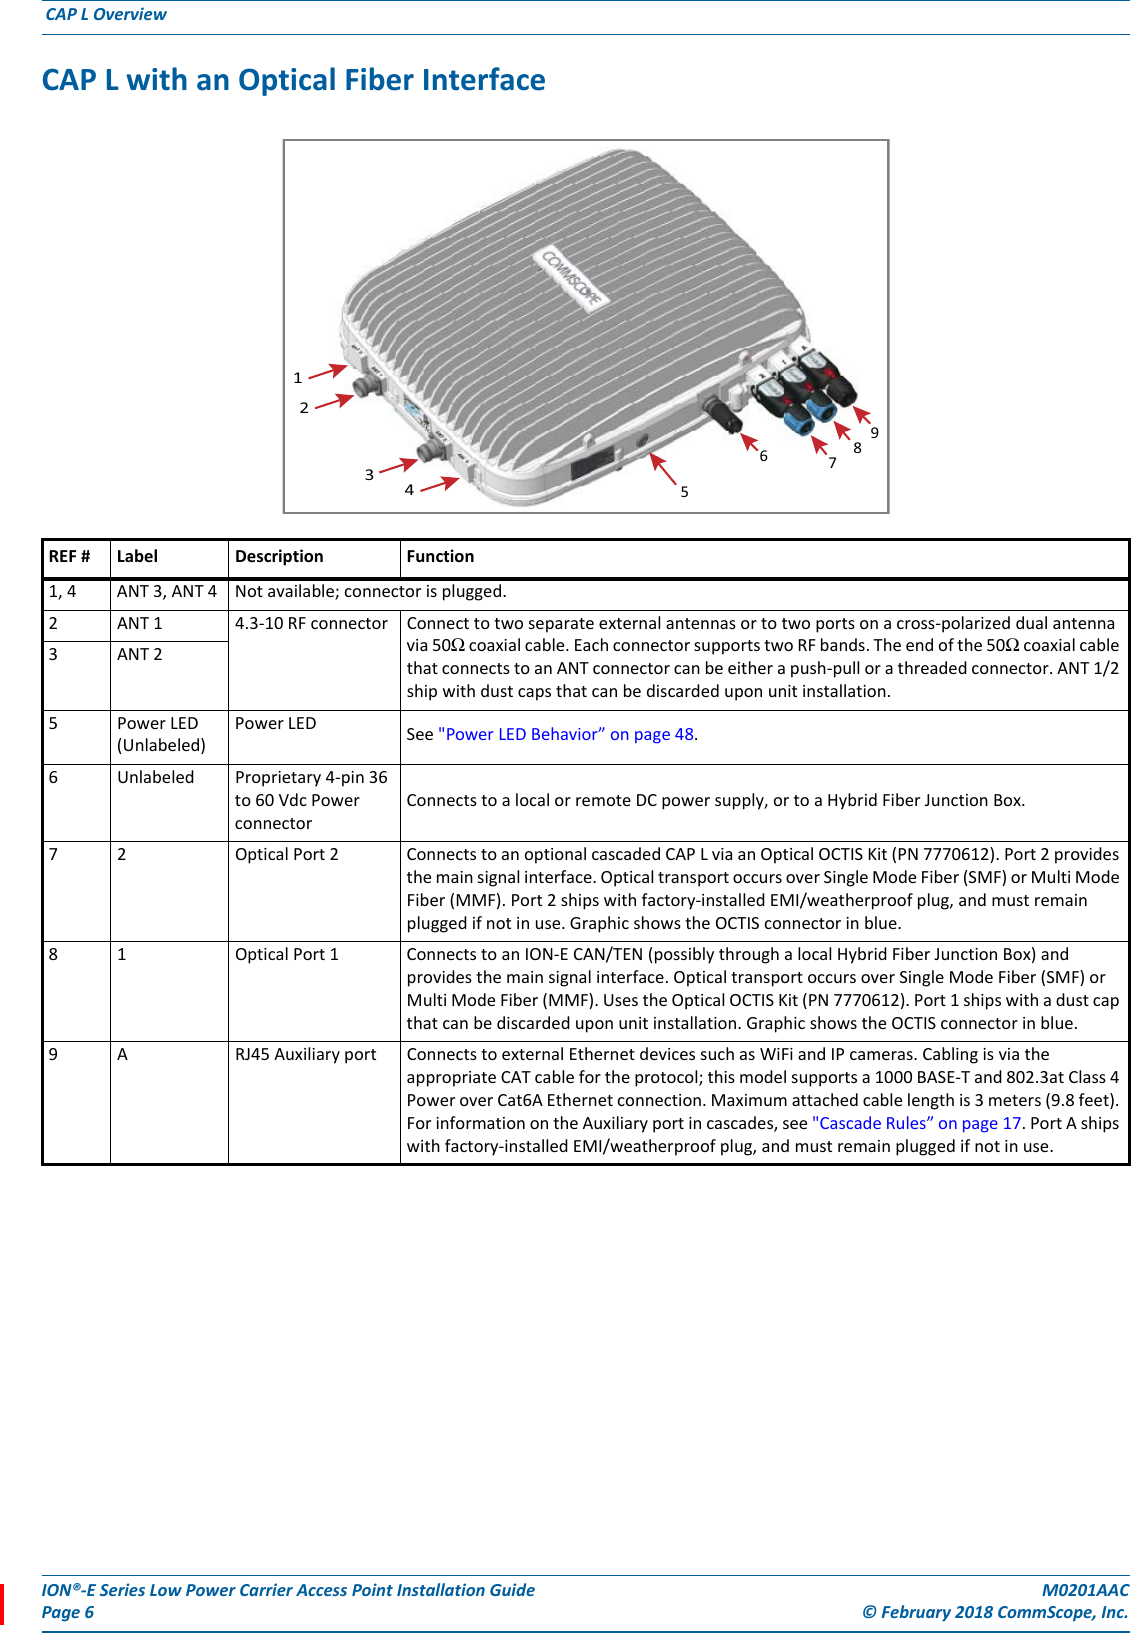 ION®-E Series Low Power Carrier Access Point Installation Guide M0201AACPage 6 © February 2018 CommScope, Inc. CAP L Overview  CAP L with an Optical Fiber Interface REF # Label Description Function1, 4 ANT 3, ANT 4 Not available; connector is plugged.2 ANT 1  4.3-10 RF connector Connect to two separate external antennas or to two ports on a cross-polarized dual antenna via 50Ω coaxial cable. Each connector supports two RF bands. The end of the 50Ω coaxial cable that connects to an ANT connector can be either a push-pull or a threaded connector. ANT 1/2 ship with dust caps that can be discarded upon unit installation. 3ANT 25Power LED (Unlabeled)Power LED See &quot;Power LED Behavior” on page 48.6 Unlabeled  Proprietary 4-pin 36 to 60 Vdc Power connectorConnects to a local or remote DC power supply, or to a Hybrid Fiber Junction Box. 7 2  Optical Port 2 Connects to an optional cascaded CAP L via an Optical OCTIS Kit (PN 7770612). Port 2 provides the main signal interface. Optical transport occurs over Single Mode Fiber (SMF) or Multi Mode Fiber (MMF). Port 2 ships with factory-installed EMI/weatherproof plug, and must remain plugged if not in use. Graphic shows the OCTIS connector in blue.8 1  Optical Port 1 Connects to an ION-E CAN/TEN (possibly through a local Hybrid Fiber Junction Box) and provides the main signal interface. Optical transport occurs over Single Mode Fiber (SMF) or Multi Mode Fiber (MMF). Uses the Optical OCTIS Kit (PN 7770612). Port 1 ships with a dust cap that can be discarded upon unit installation. Graphic shows the OCTIS connector in blue.9 A RJ45 Auxiliary port Connects to external Ethernet devices such as WiFi and IP cameras. Cabling is via the appropriate CAT cable for the protocol; this model supports a 1000 BASE-T and 802.3at Class 4 Power over Cat6A Ethernet connection. Maximum attached cable length is 3 meters (9.8 feet). For information on the Auxiliary port in cascades, see &quot;Cascade Rules” on page 17. Port A ships with factory-installed EMI/weatherproof plug, and must remain plugged if not in use.123478965